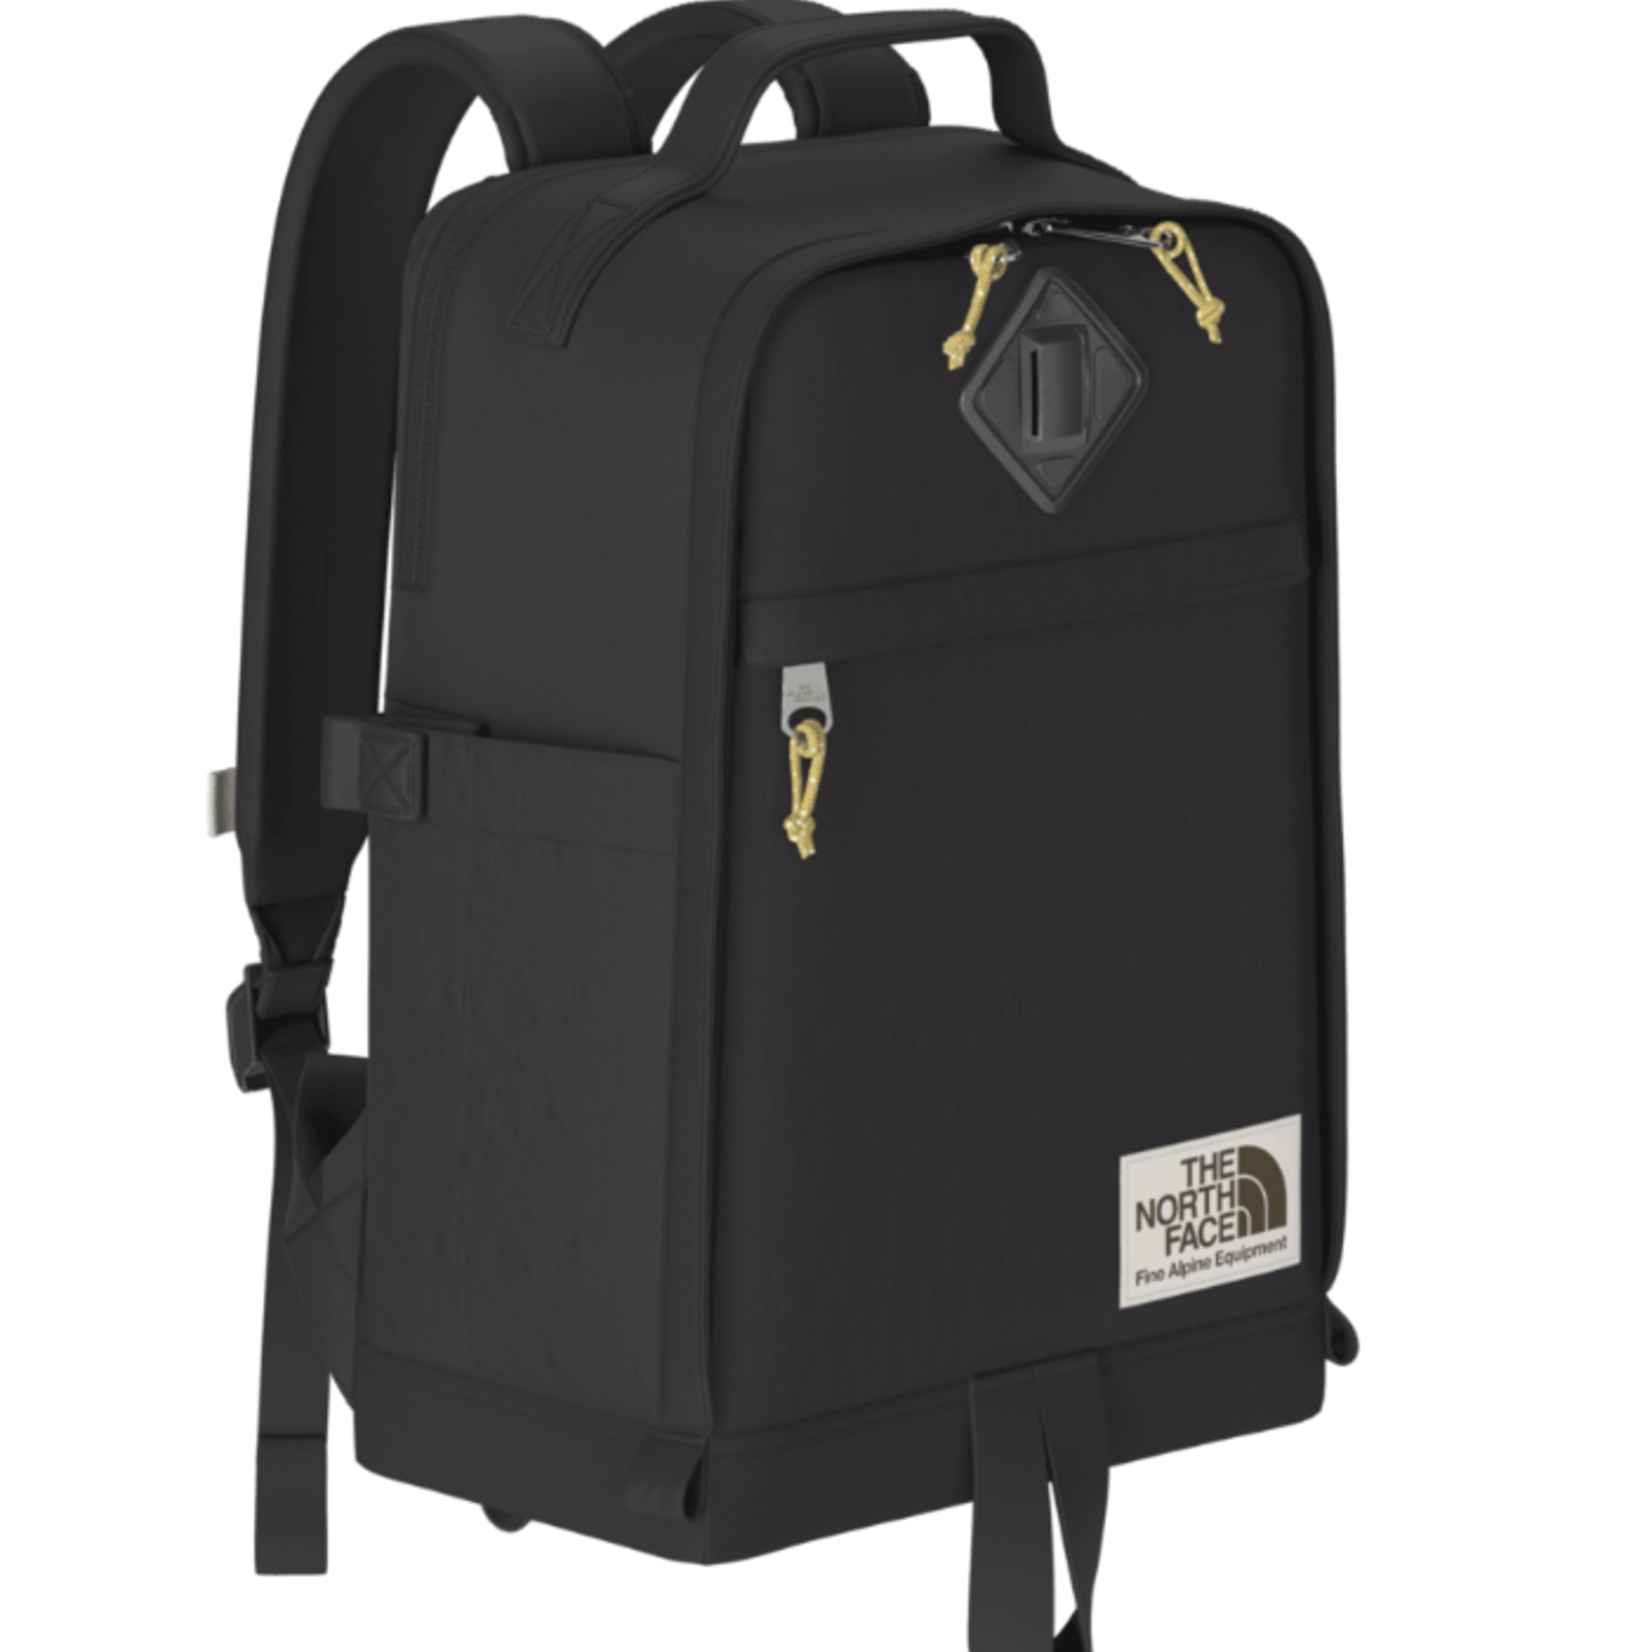 The North Face The North Face Backpack, Berkeley Daypack